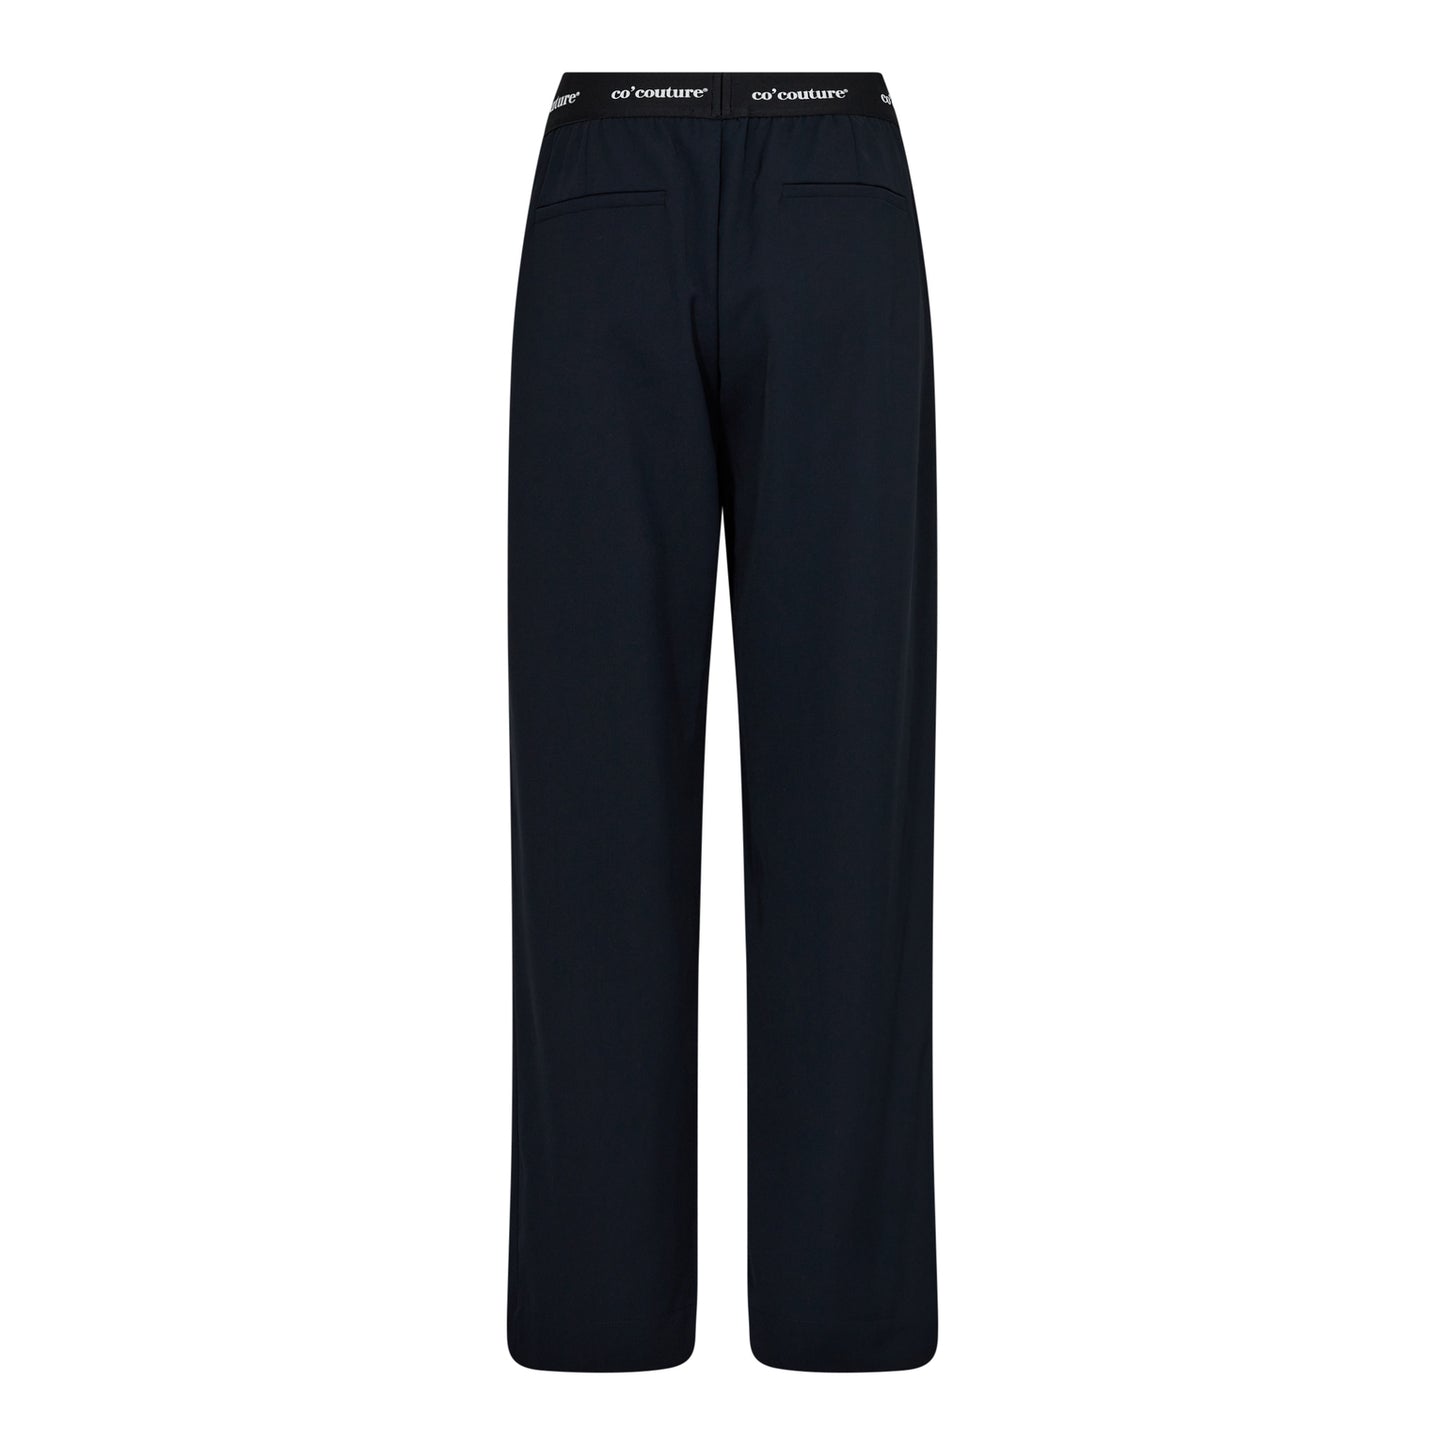 Co'couture | AminaCC Logo Long Pant Navy